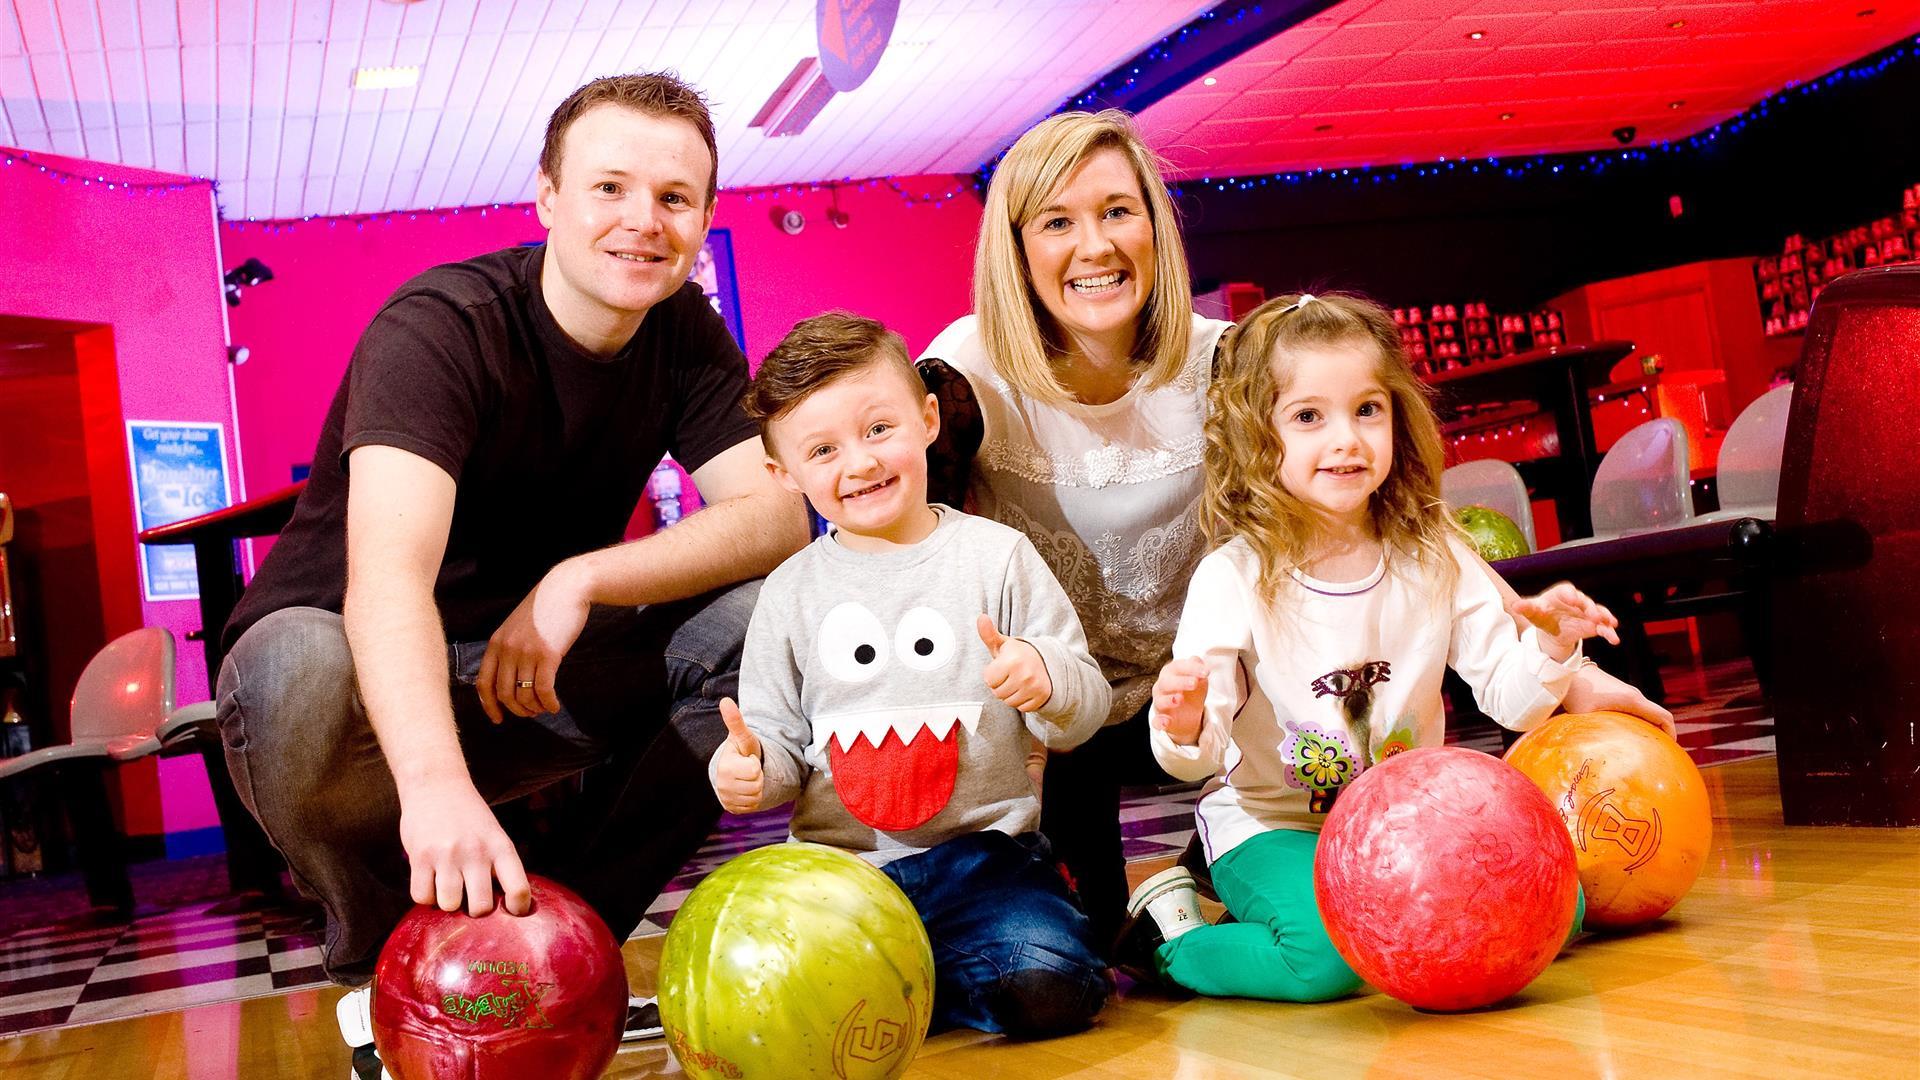 Image is of a family posing for a photo in the bowling alley